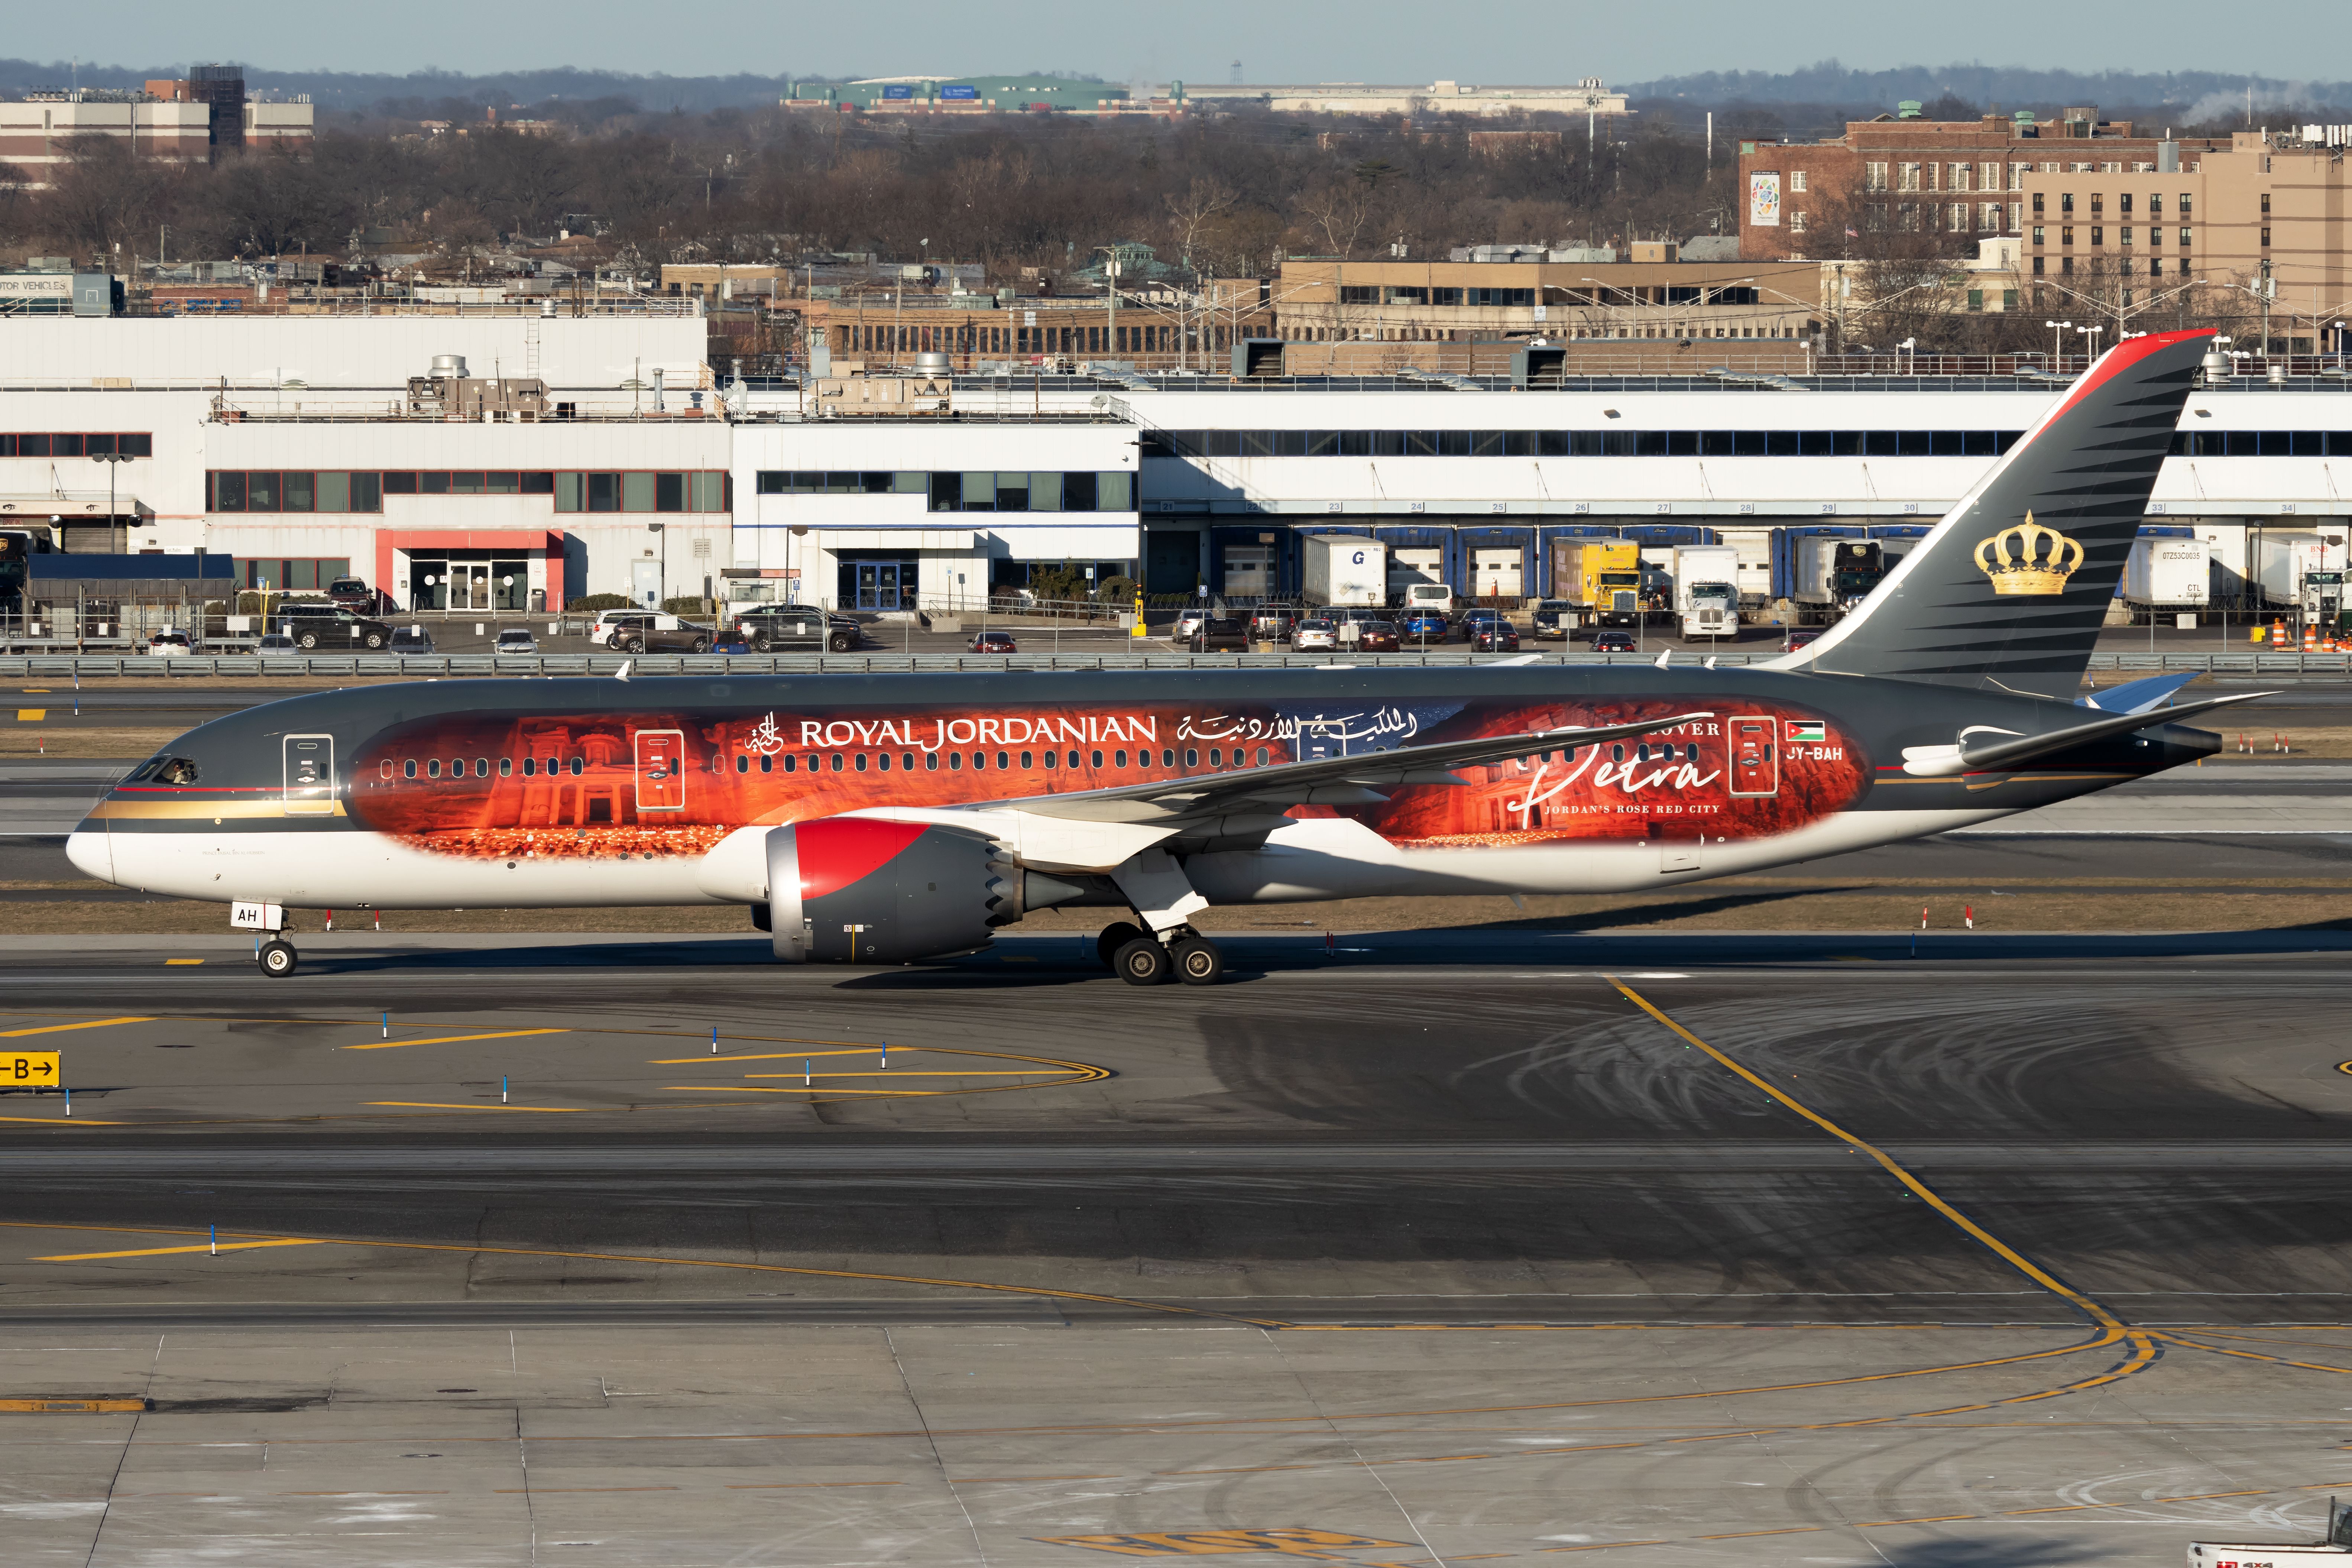 A Royal Jordanian Boeing 787 painted with a special livery on an airport apron.